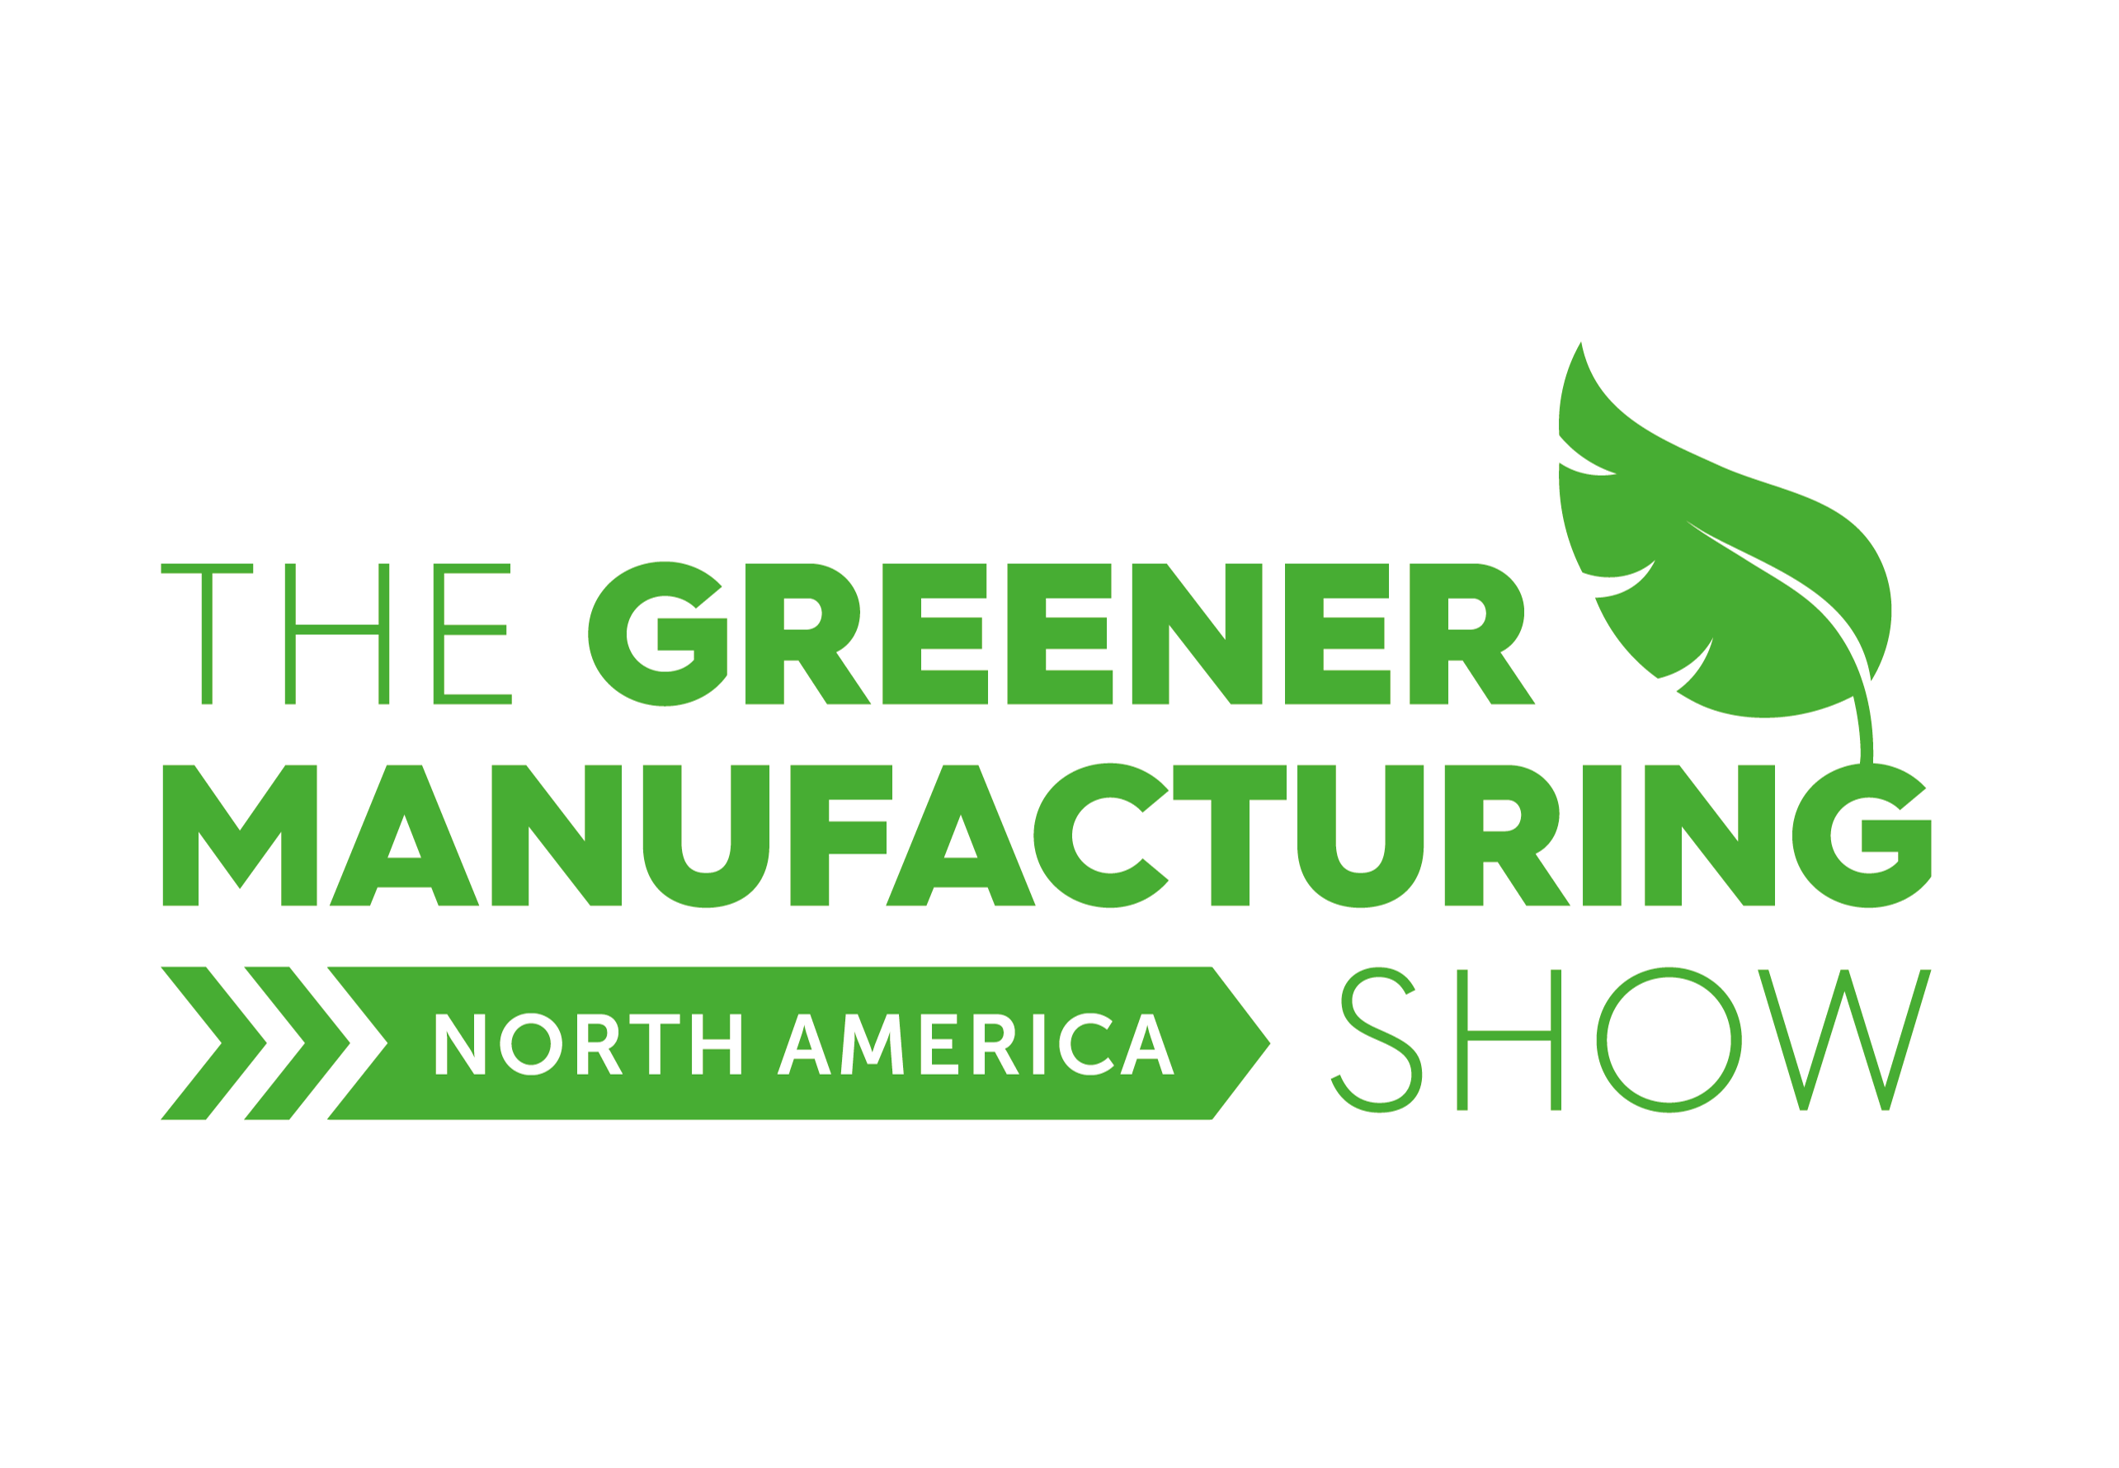 NexantECA - Greener Manufacturing Show/Plastic Waste Free World" Conference in Atlanta on June 9th 2022